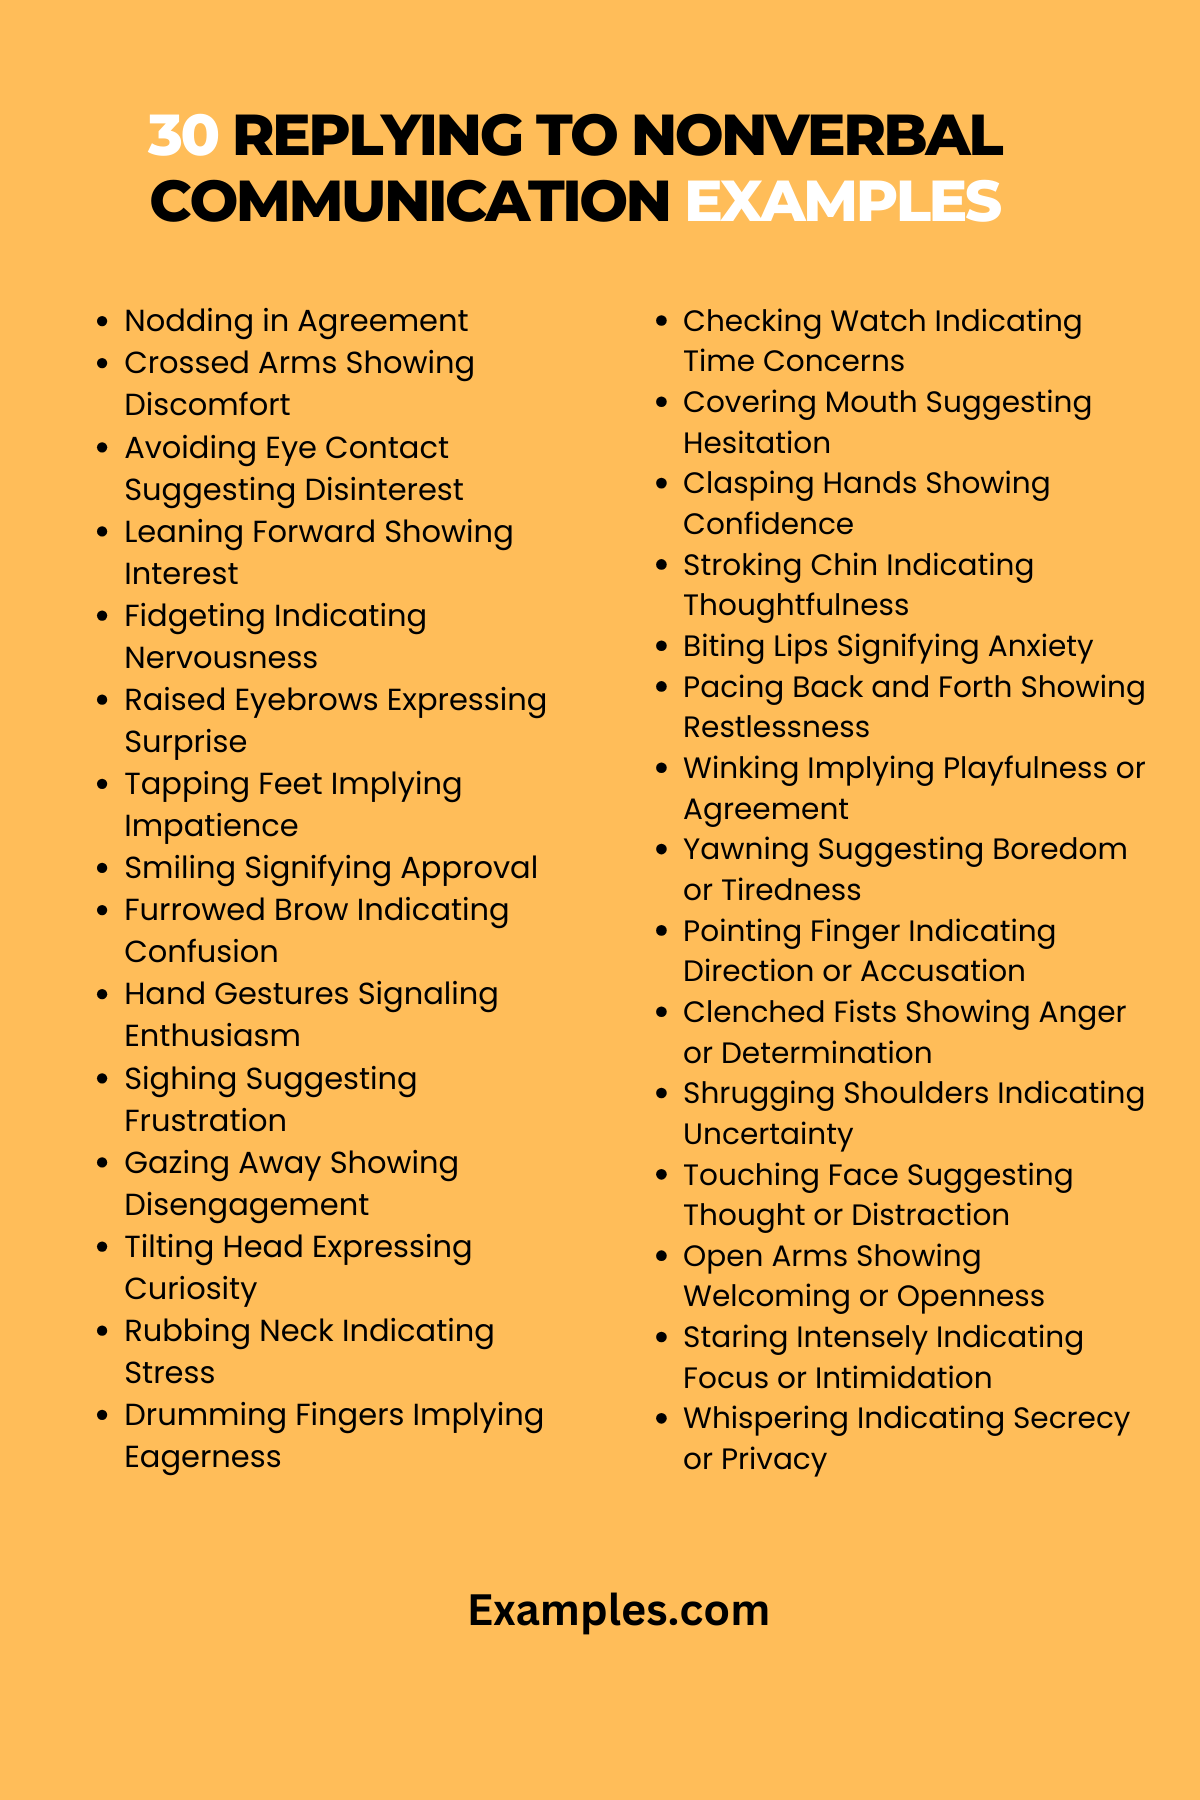 30 replying to nonverbal communication examples